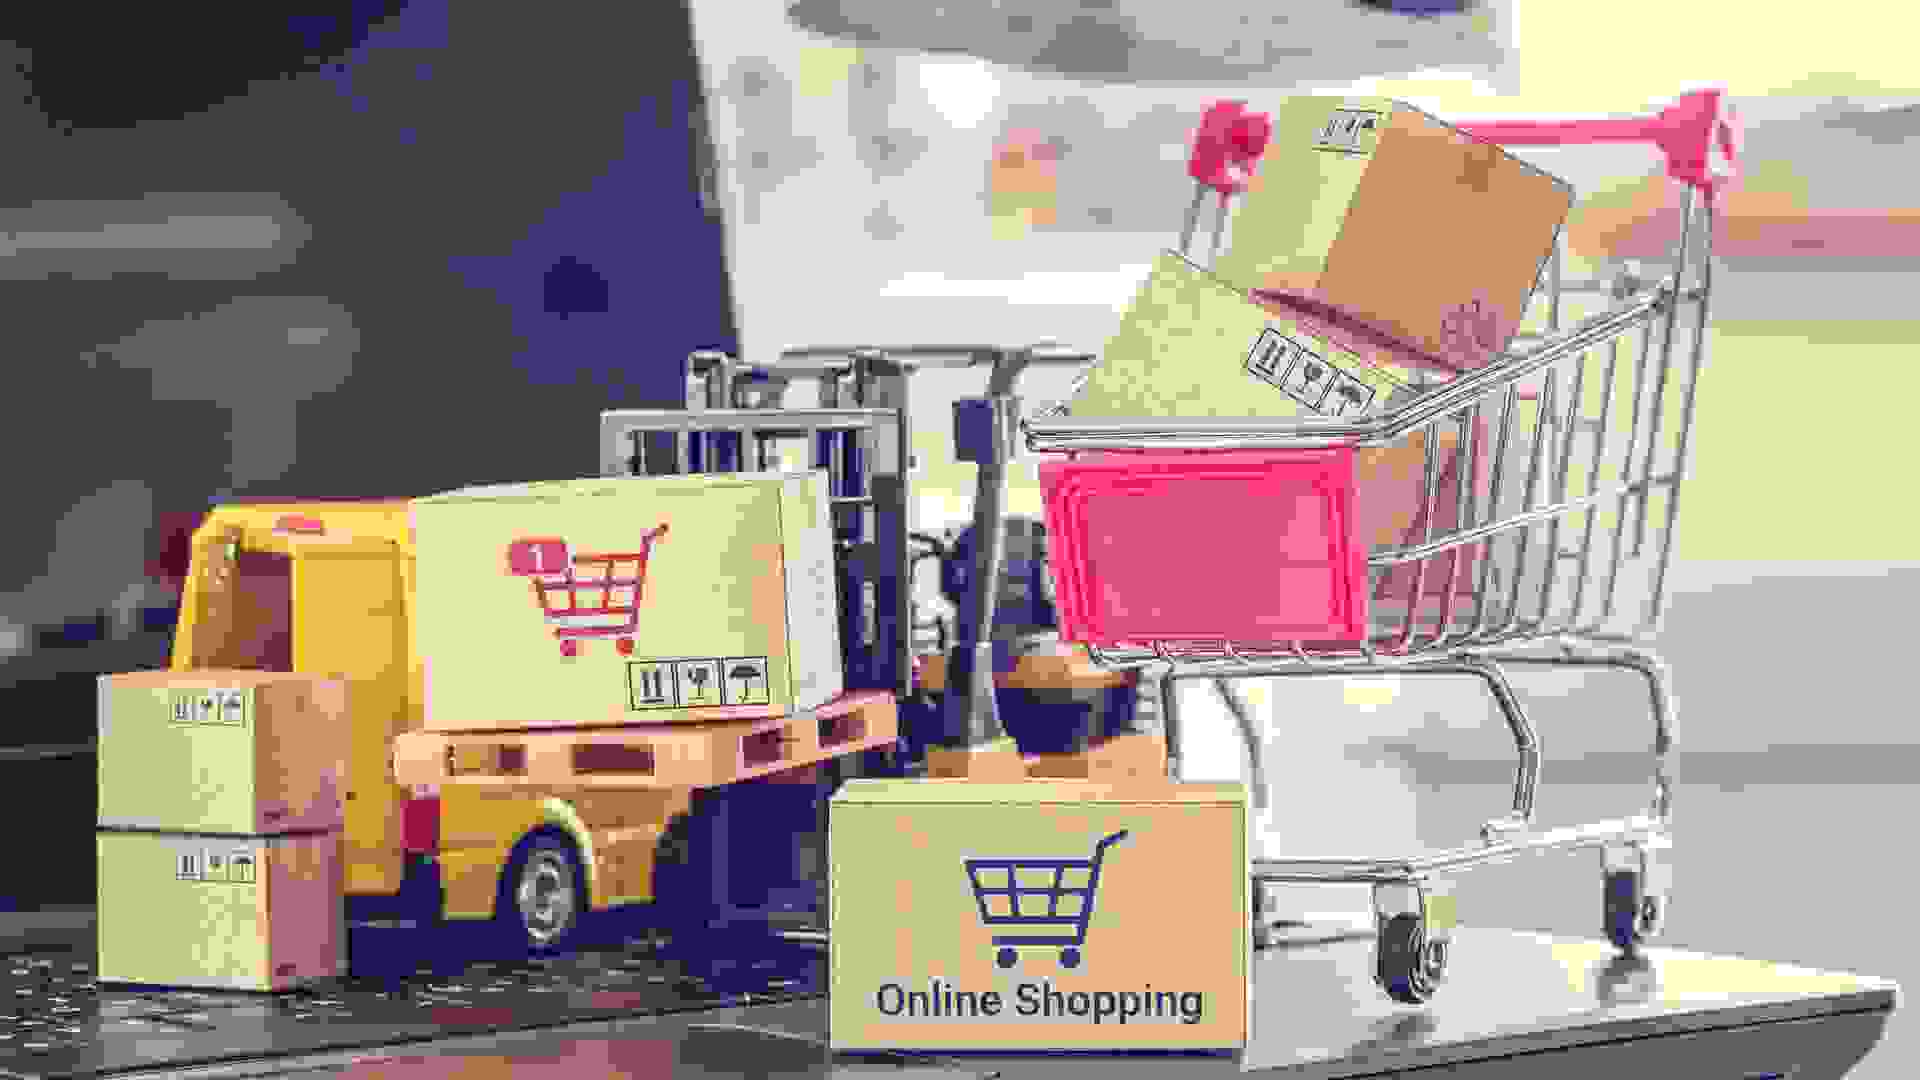 Online shopping, logistics, supply chain and shipment service, e-commerce concept.